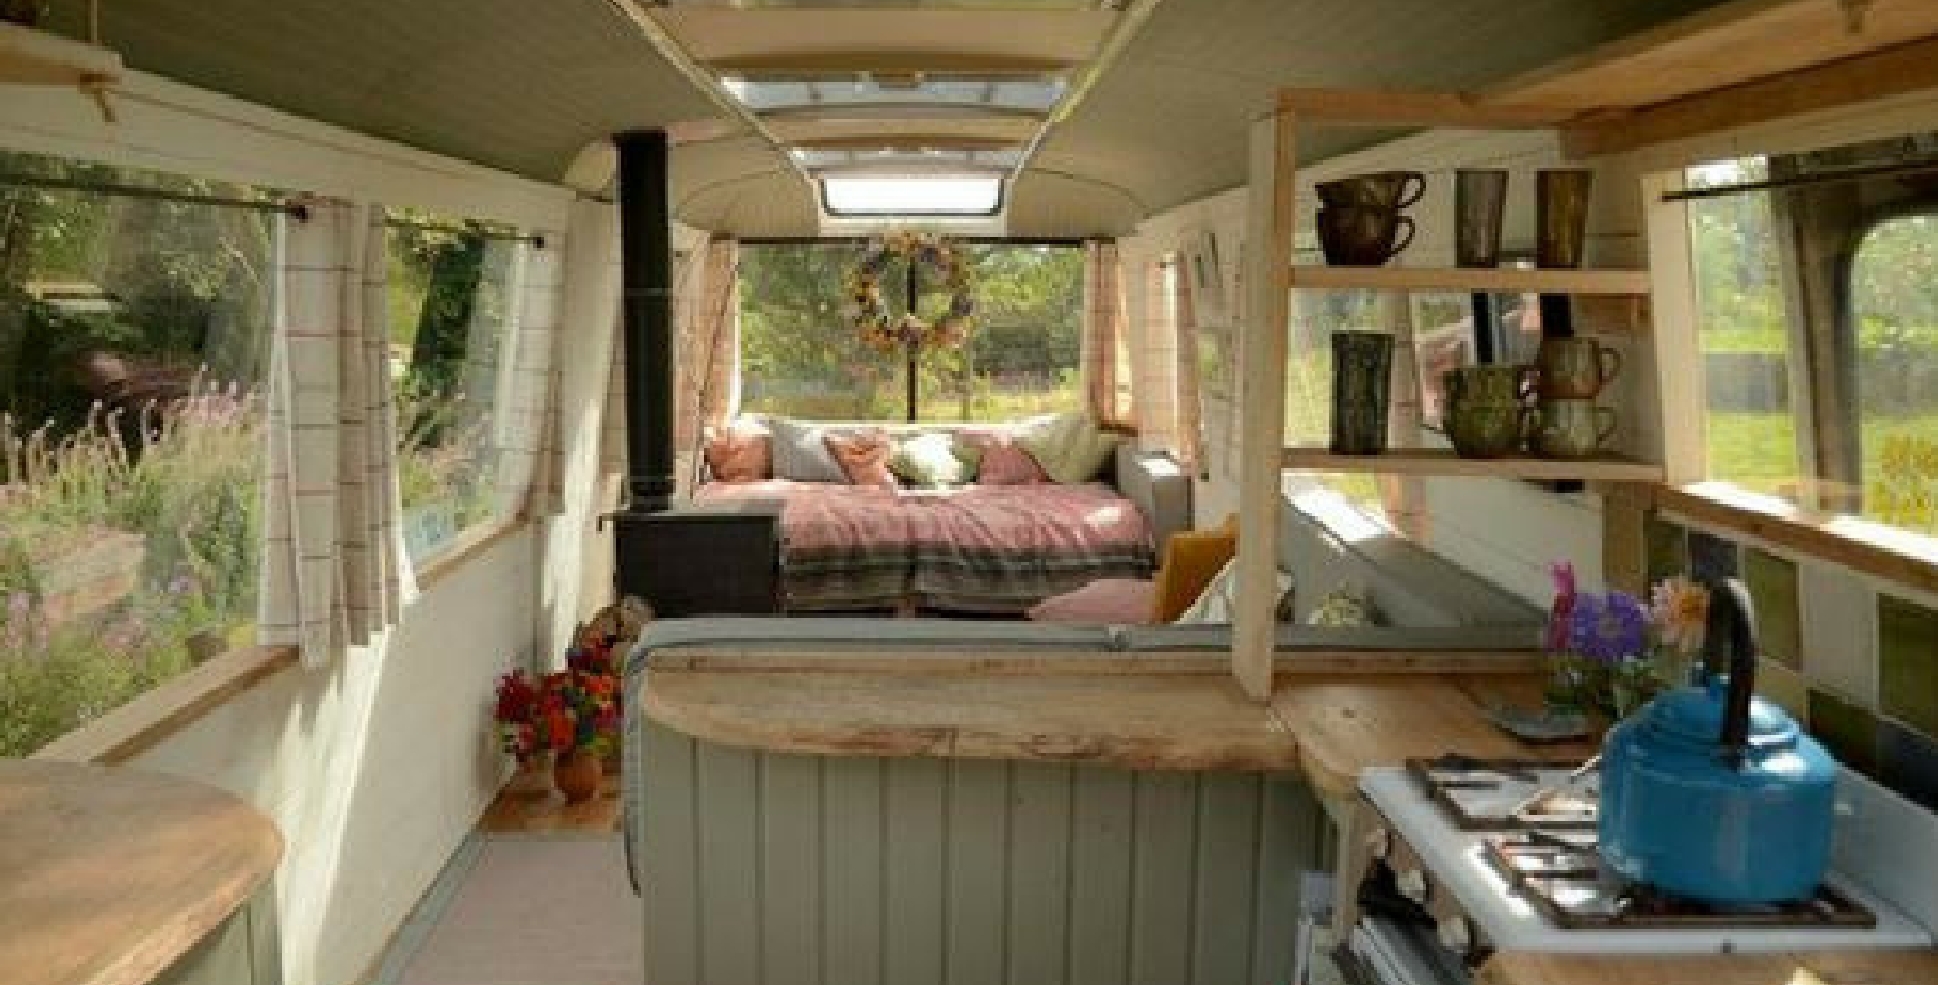 Converted Buses Into Tiny Homes